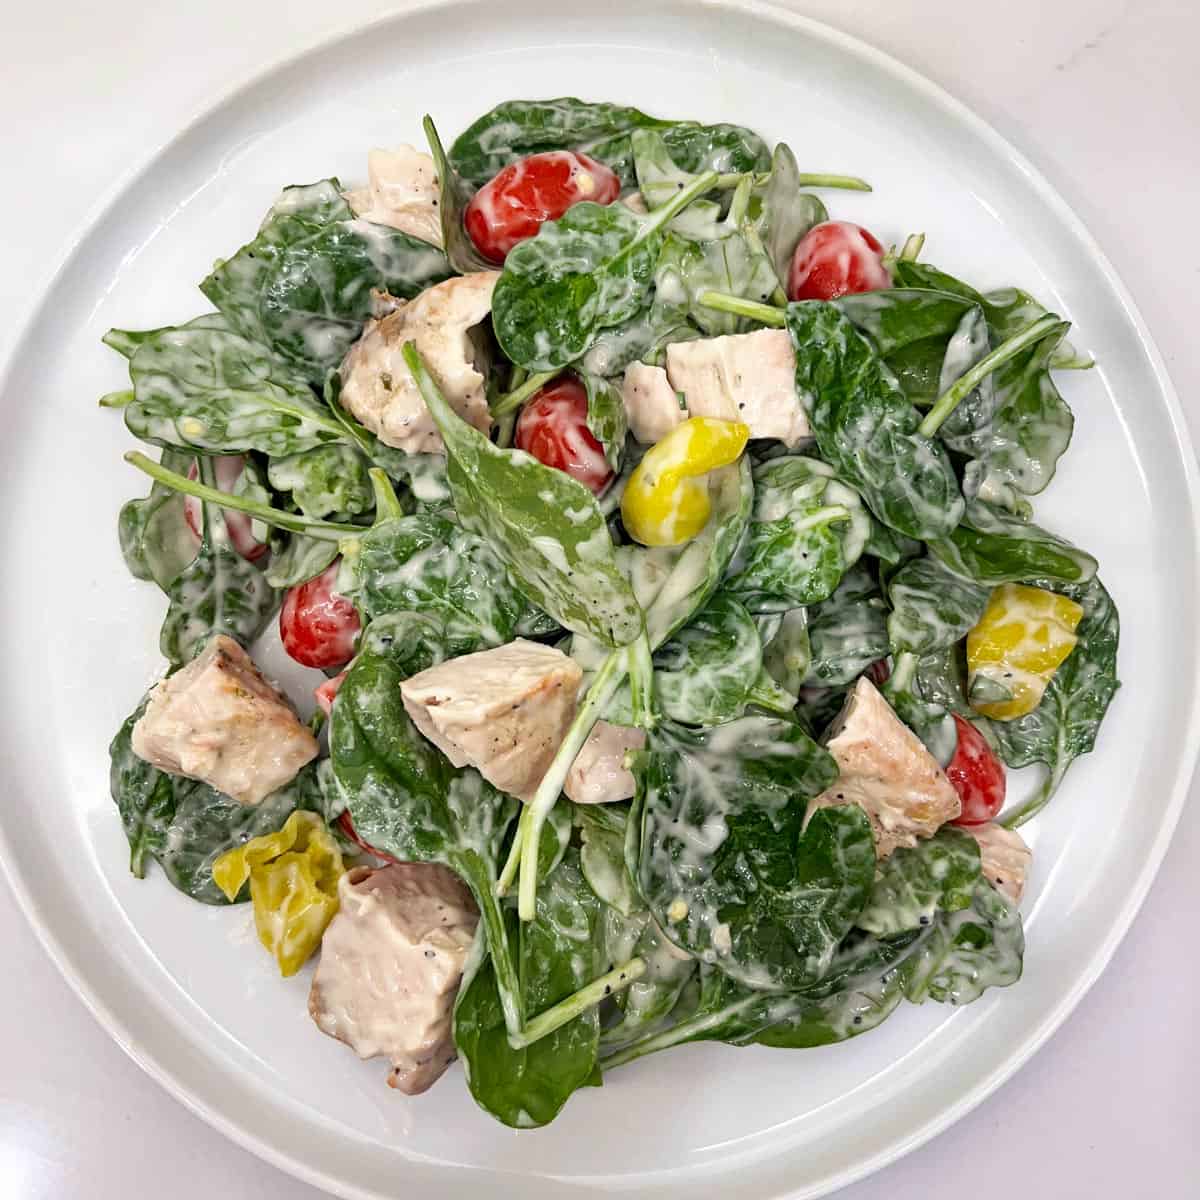 A salad made with leftover grilled chicken breast.